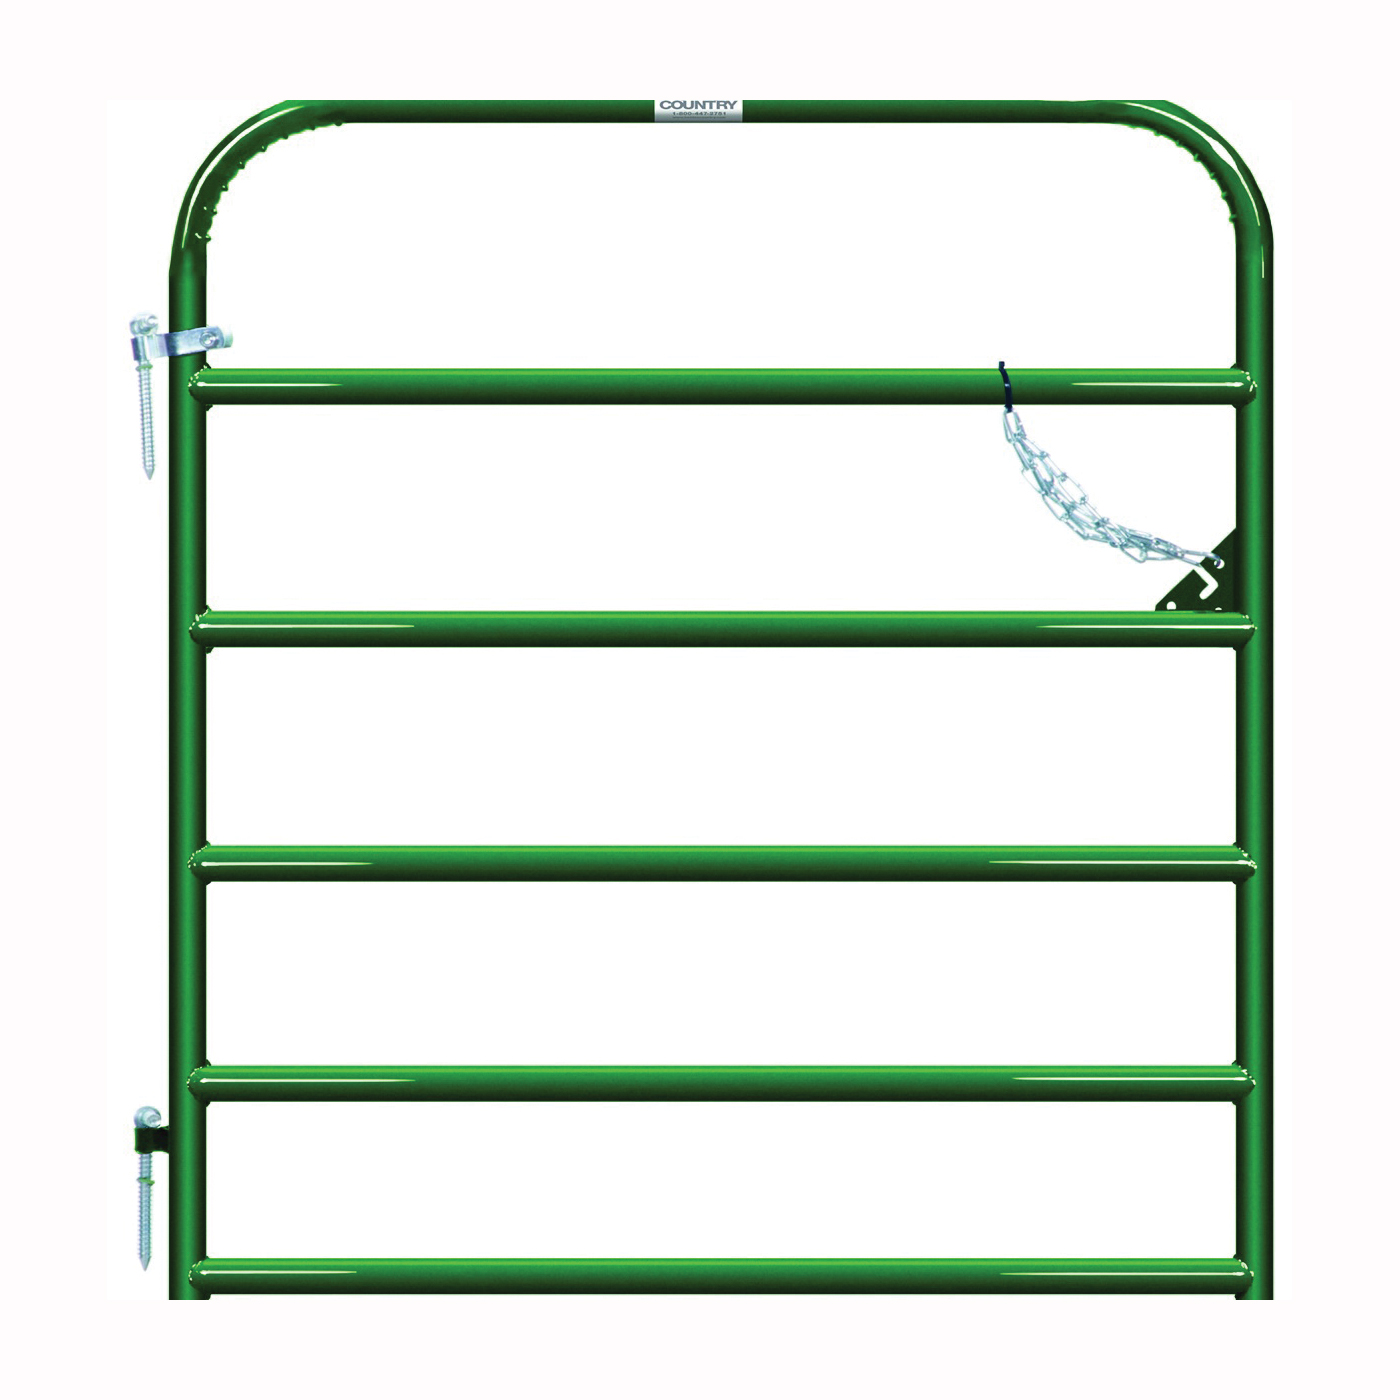 Behlen Country 40130042 Utility Gate, 48 in W Gate, 50 in H Gate, 20 ga Frame Tube/Channel, Green